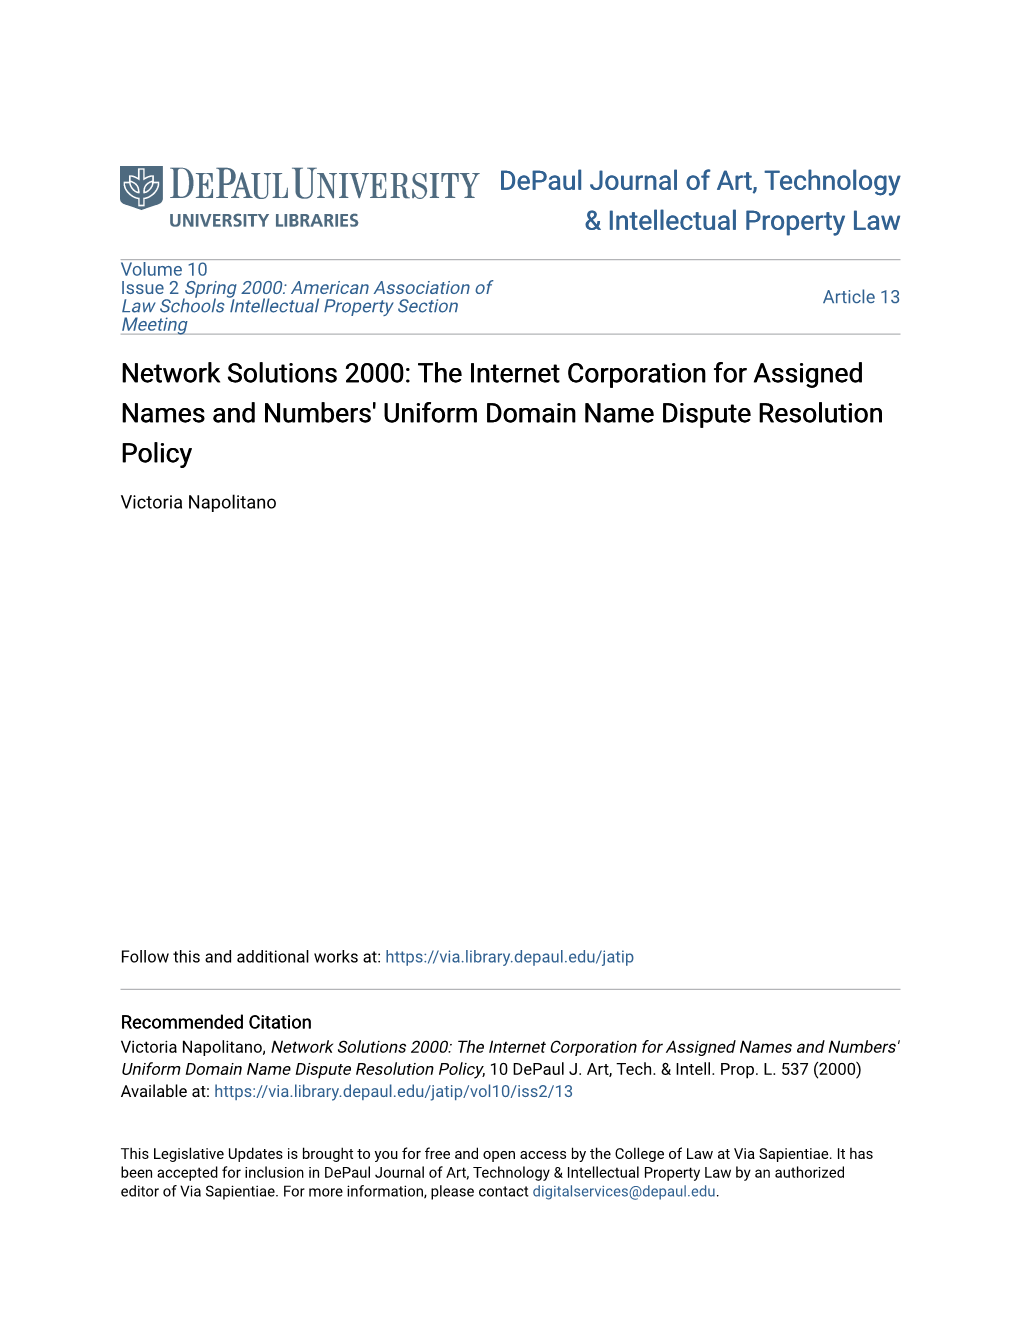 Network Solutions 2000: the Internet Corporation for Assigned Names and Numbers' Uniform Domain Name Dispute Resolution Policy